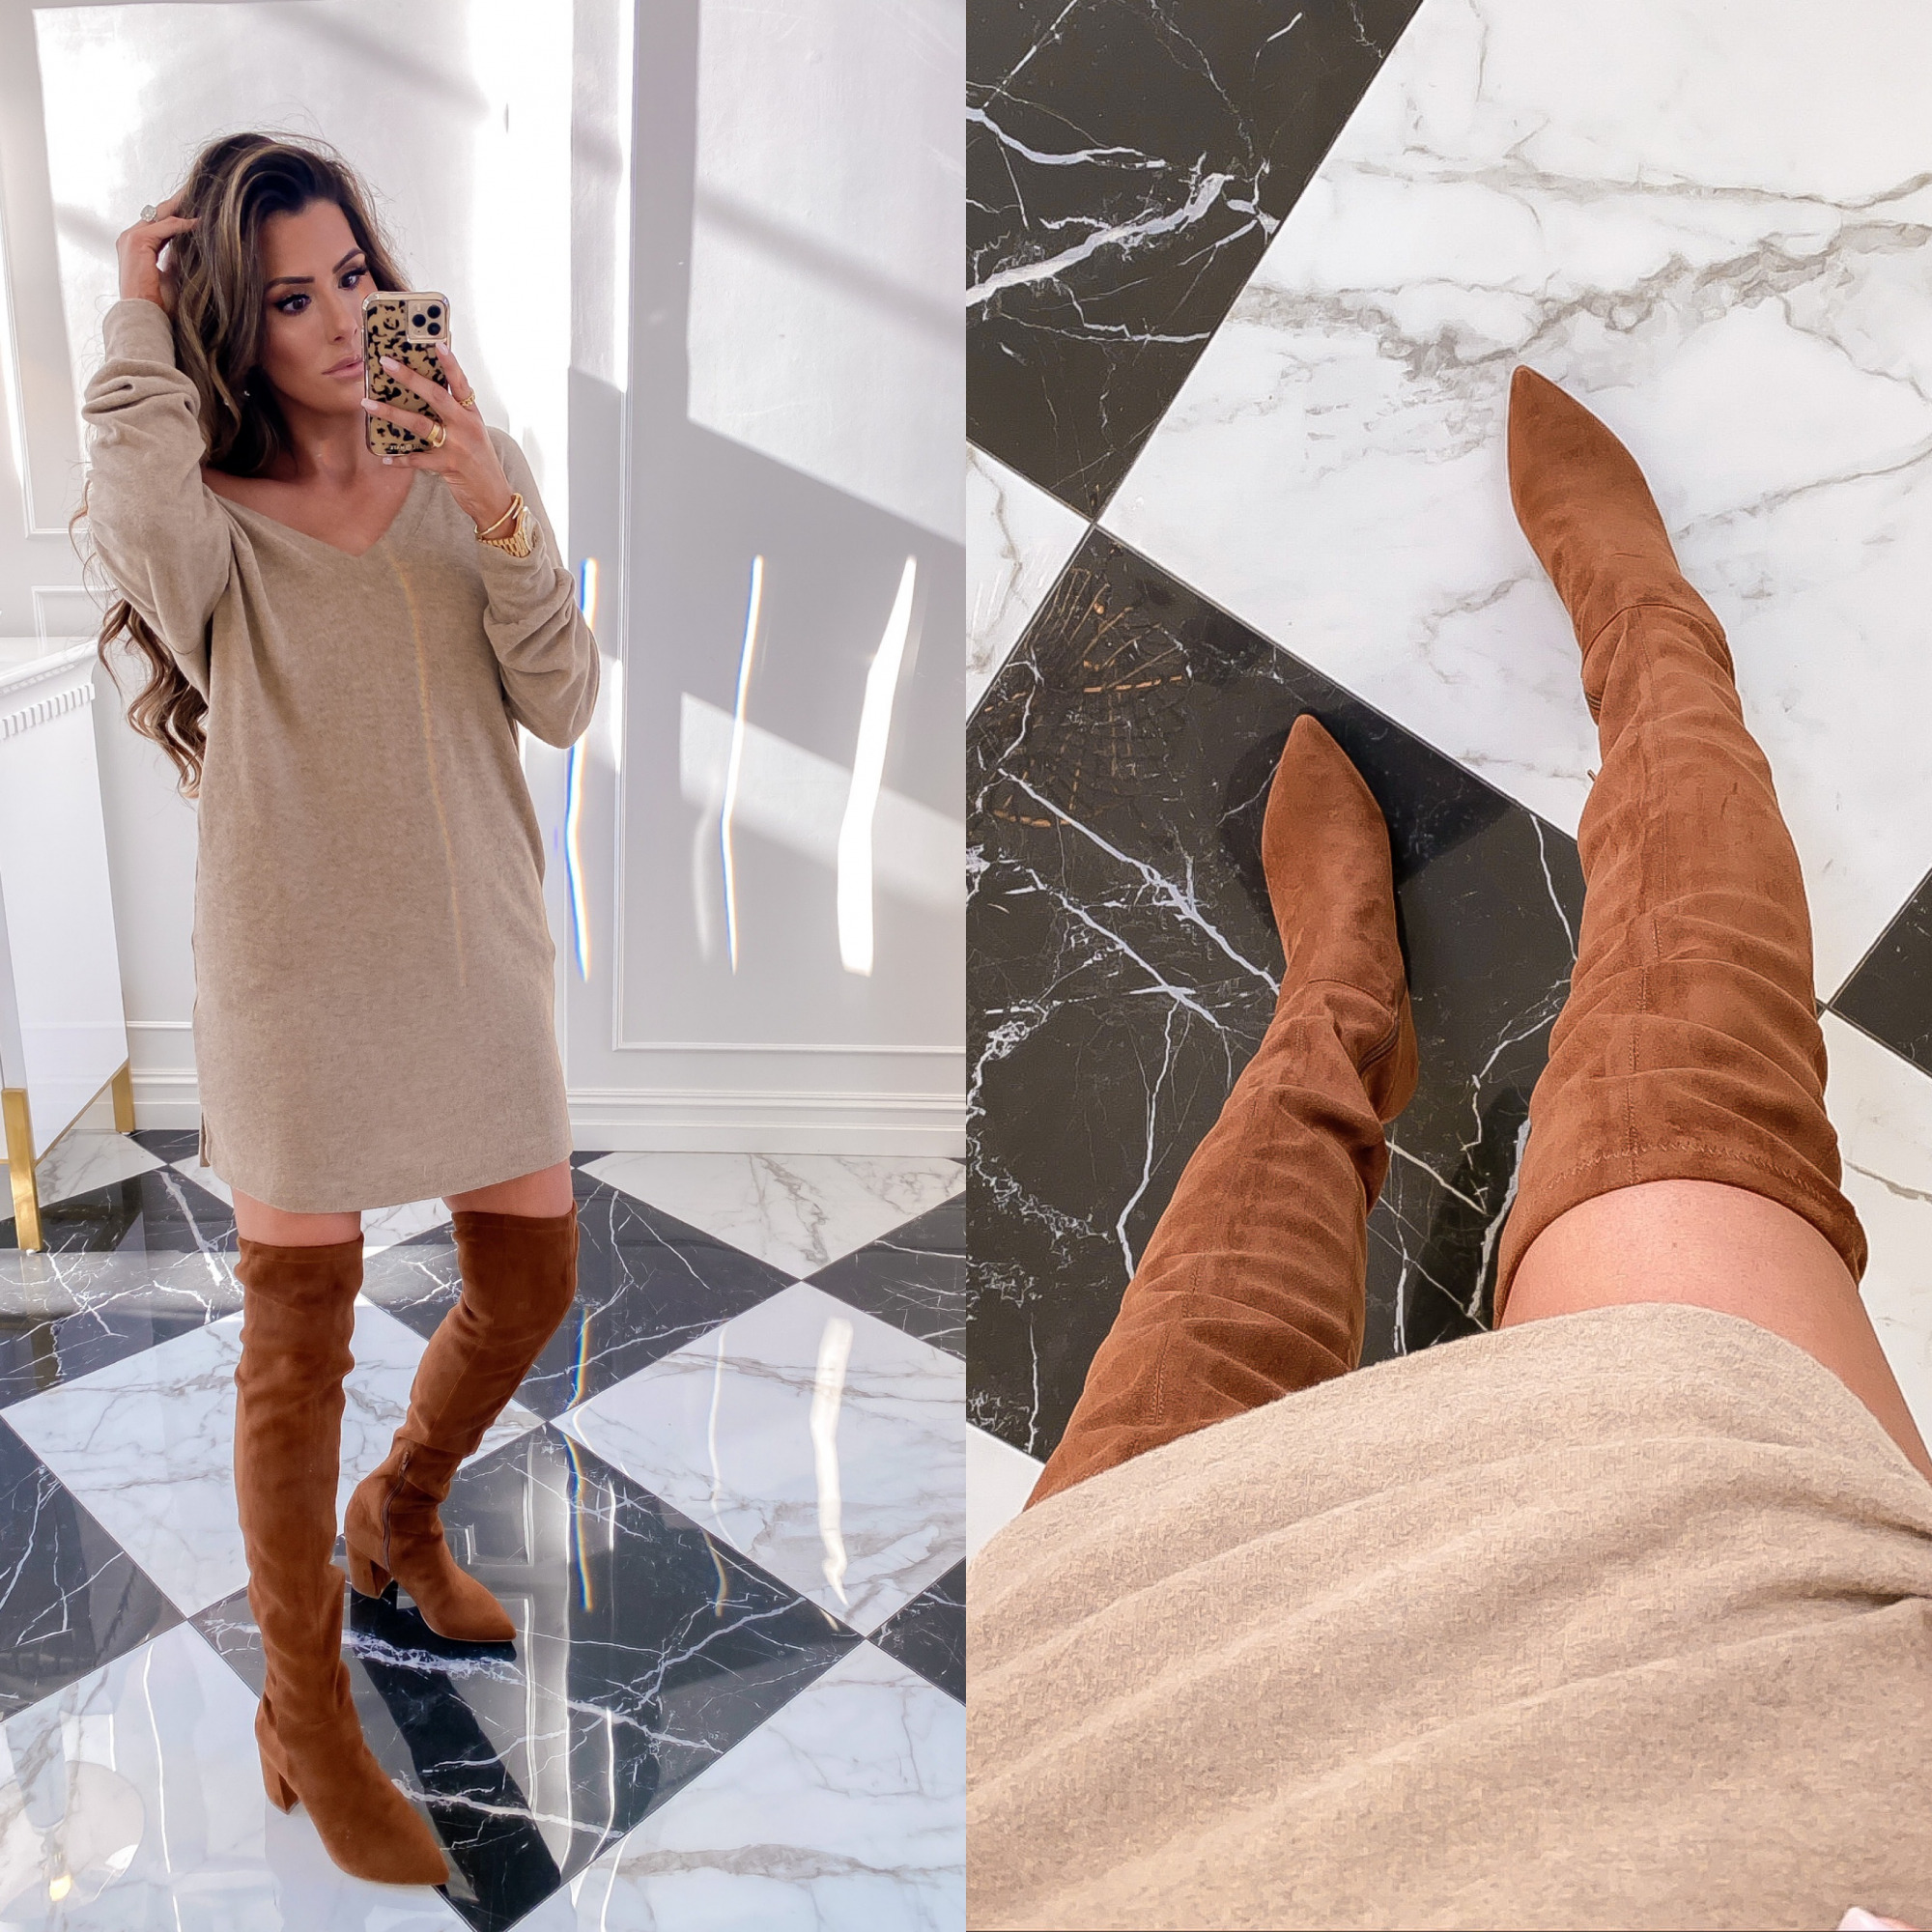 Nordstrom Anniversary Sale 2020 try on blog, NSALE 2020 boots dresses fall, emily gemma | Nordstrom Anniversary Sale by popular US fashion blog, The Sweetest Thing: image of Emily Gemma wearing a SOCIALITE SWEATER DRESS, STEVE MADDEN NIFTY POINTED TOE OVER THE KNEE BOOTS, and GOLD MICHELE WATCH.